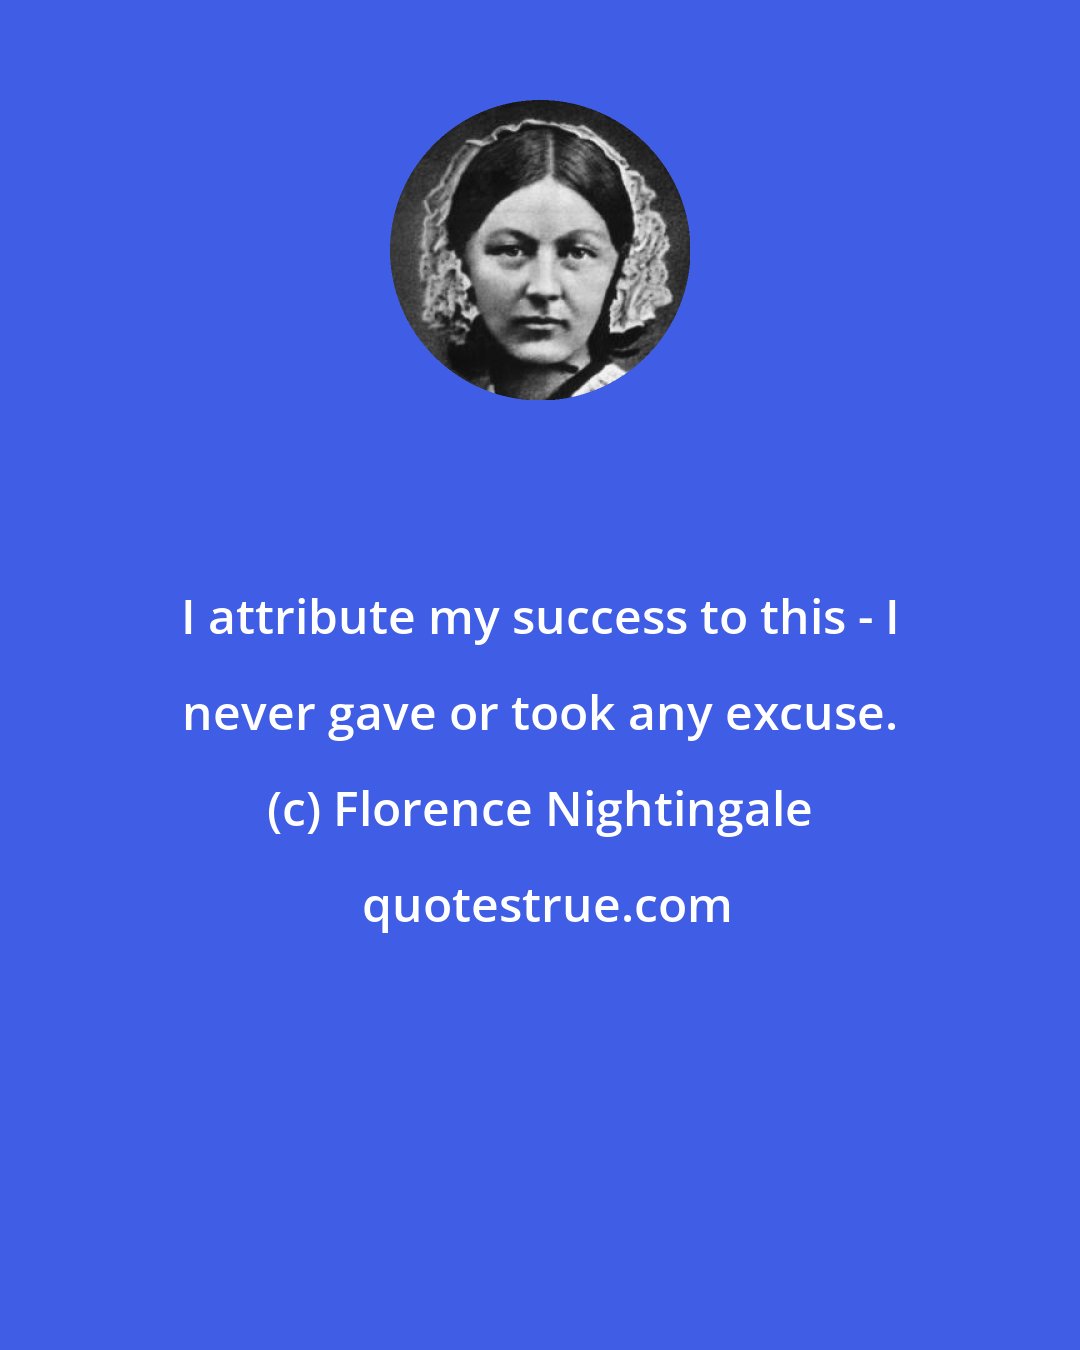 Florence Nightingale: I attribute my success to this - I never gave or took any excuse.